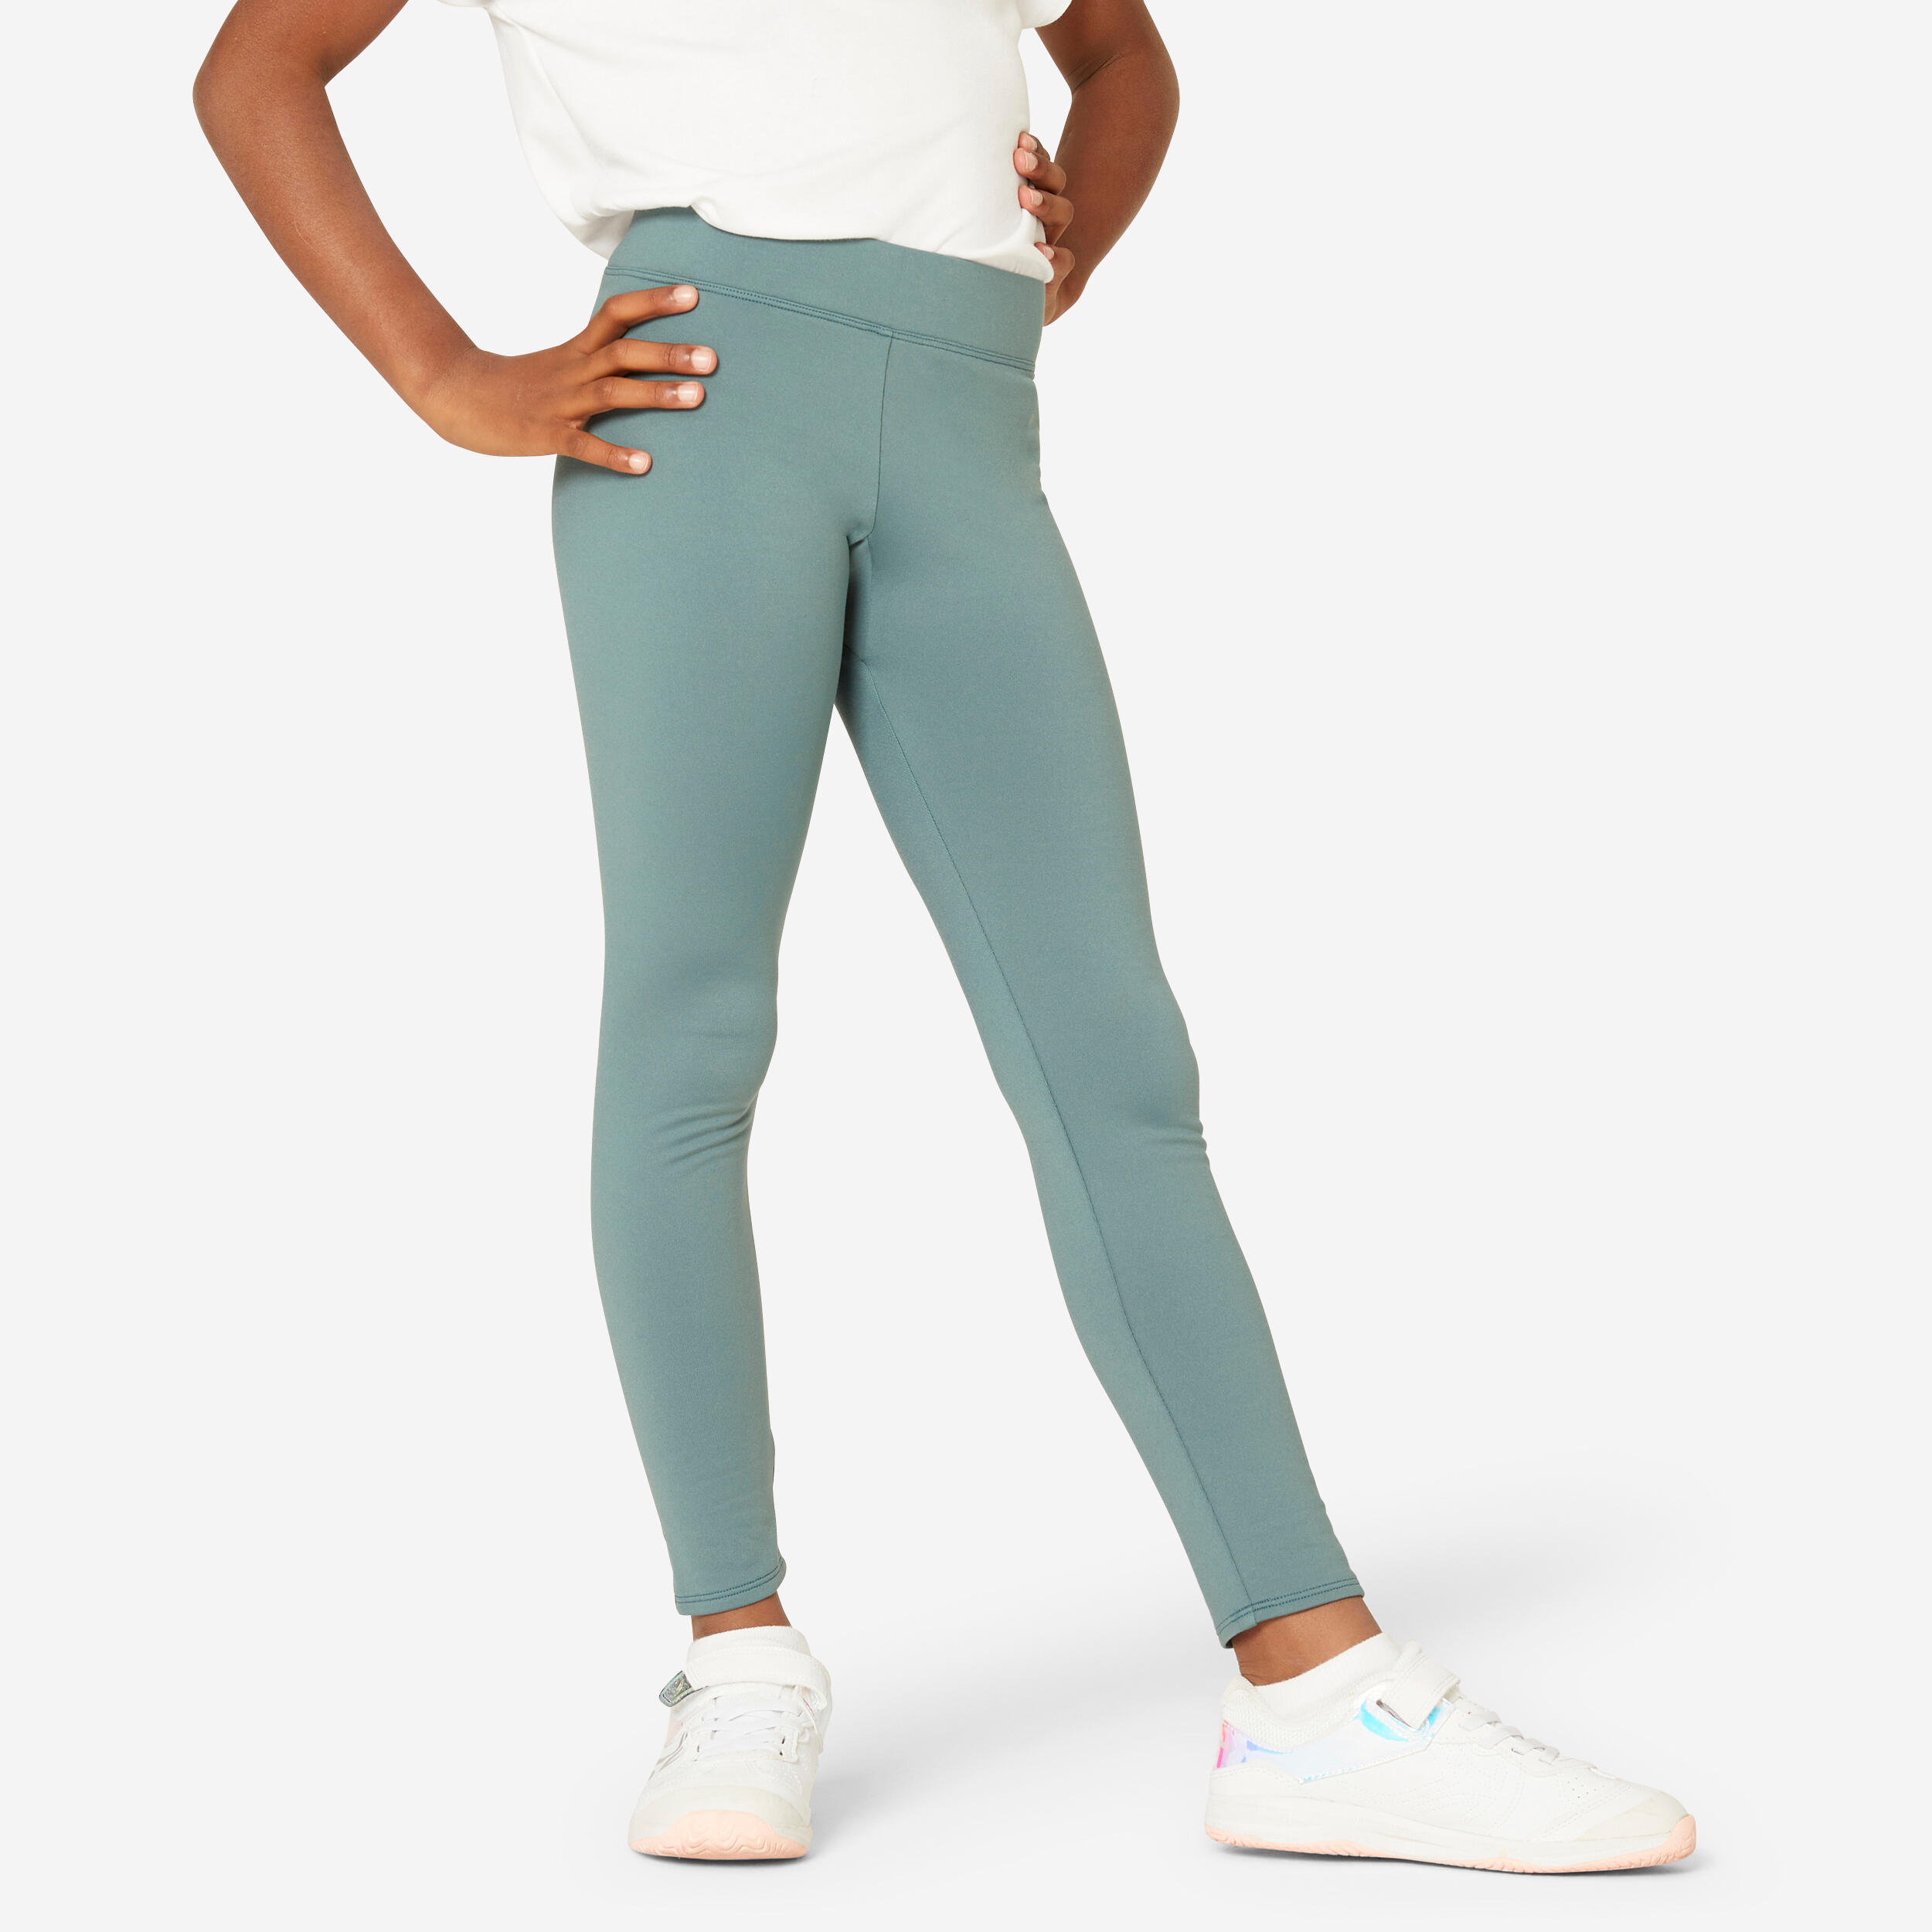 Girls' Warm Breathable Synthetic Leggings S100 - Green 1/4